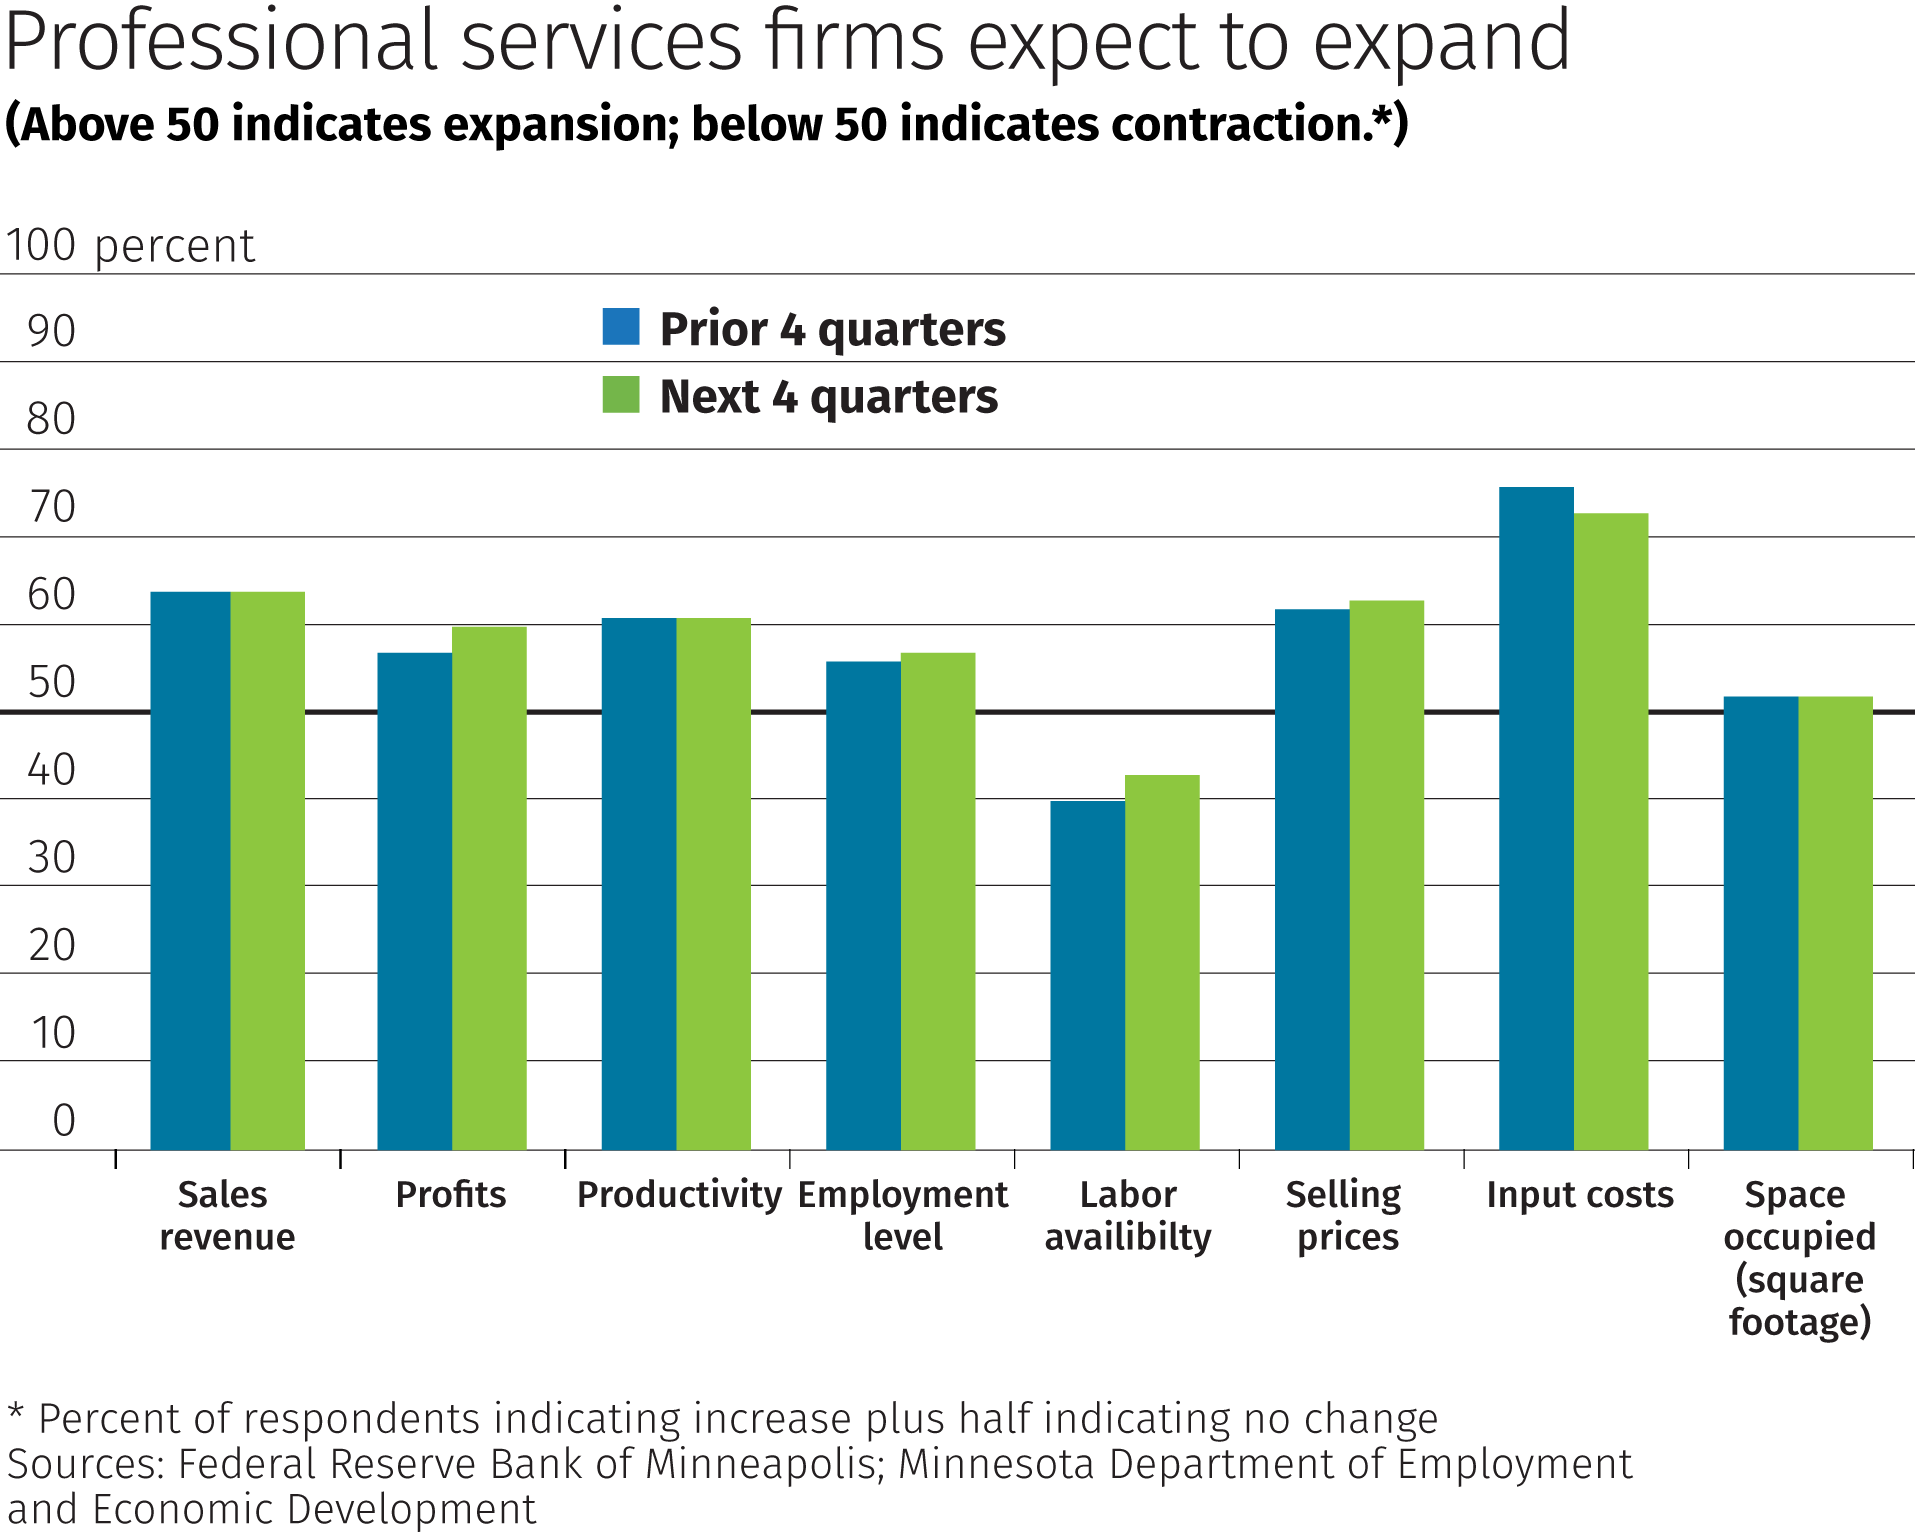 Professional services firms expect to expand